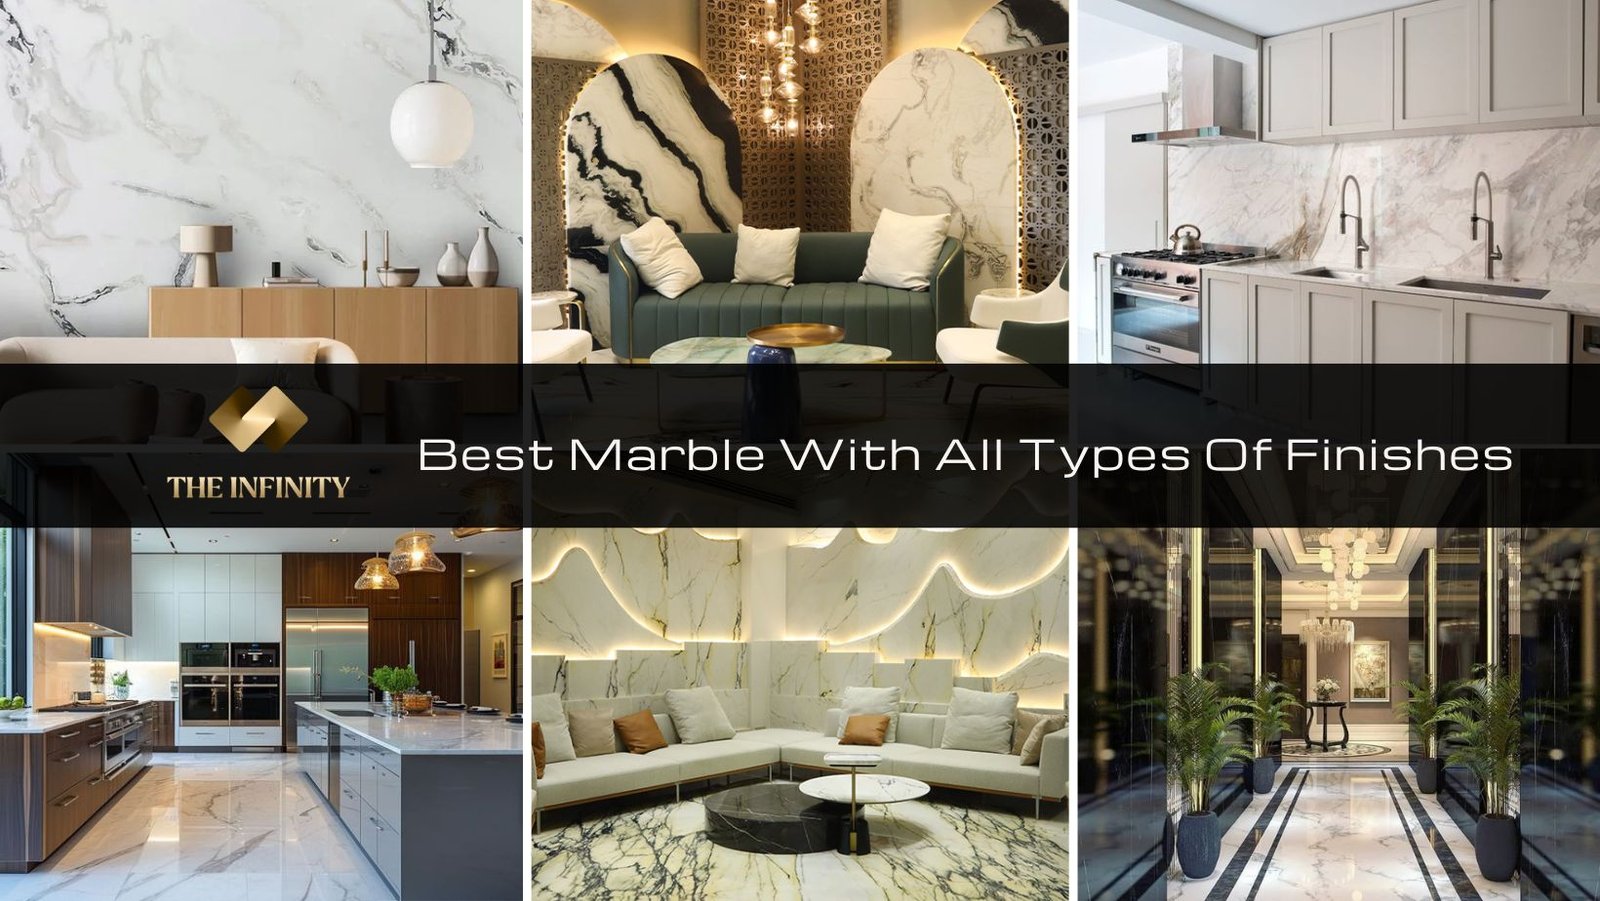 Best Marble With All Types Of Finishes